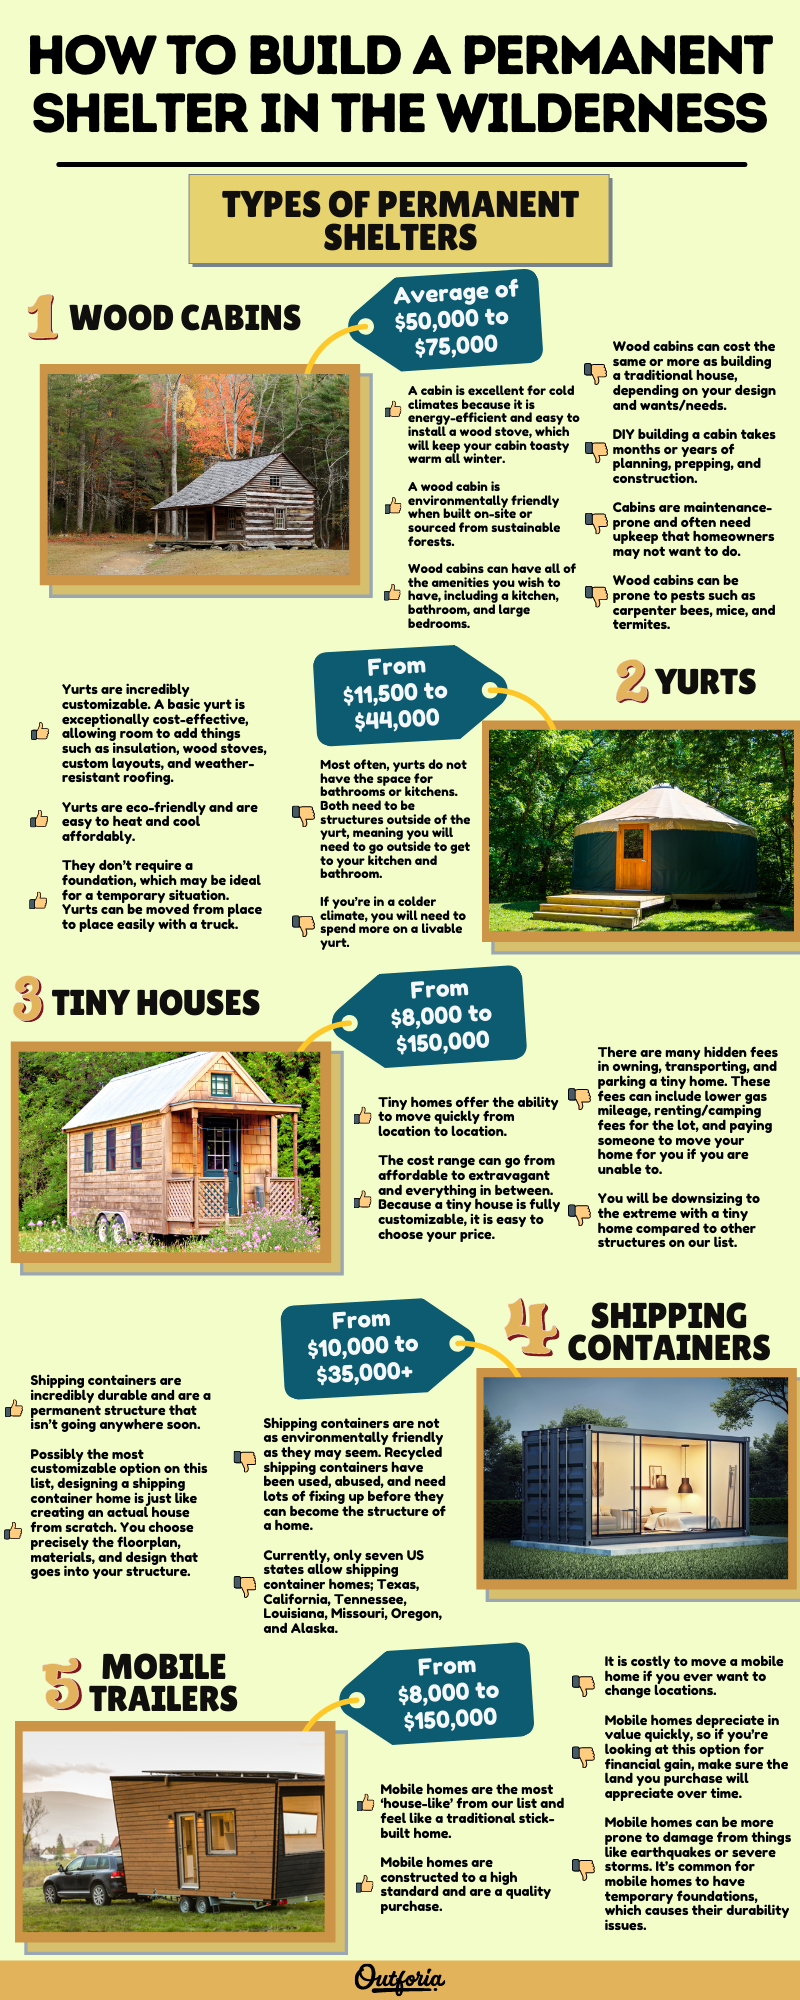 Types of permanent shelter for use in wilderness chart and infographic with pros and cons